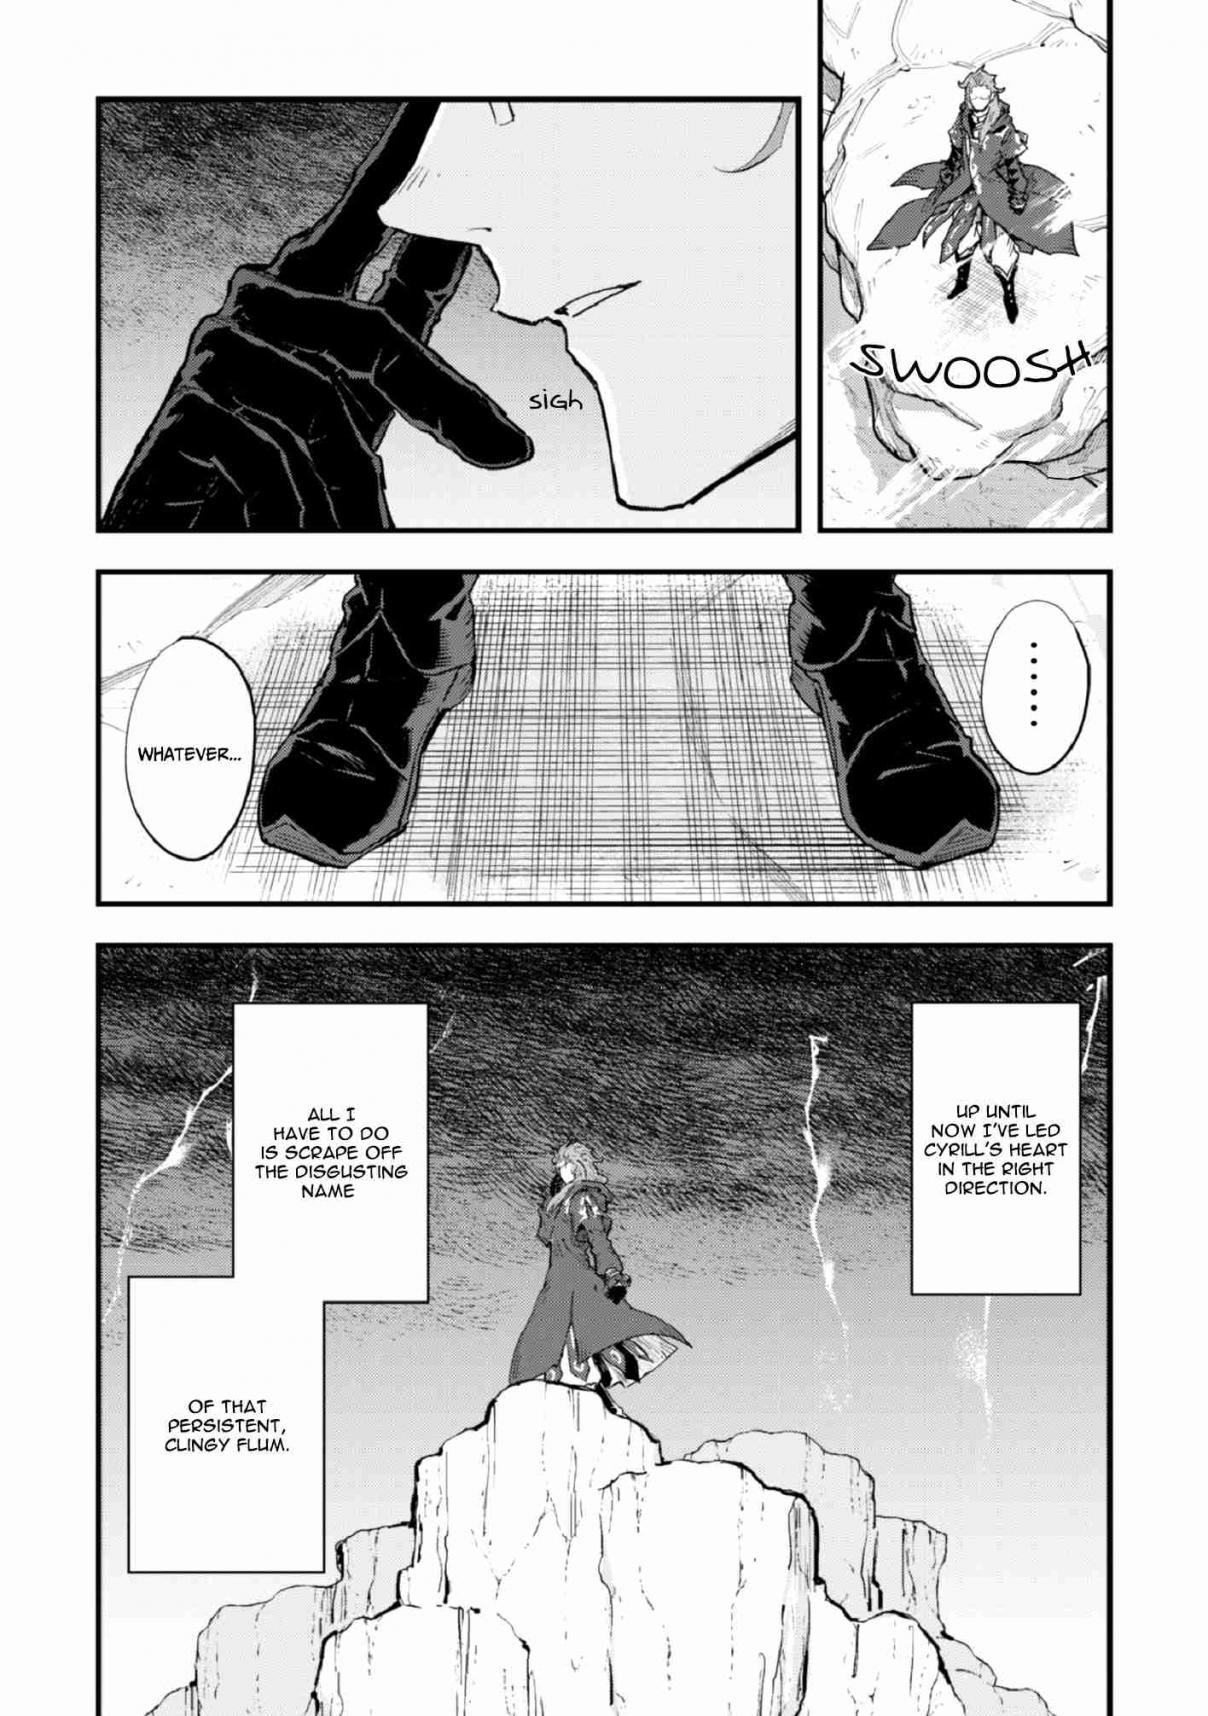 Do You Think Someone Like You Could Defeat the Demon Lord? Ch. 2